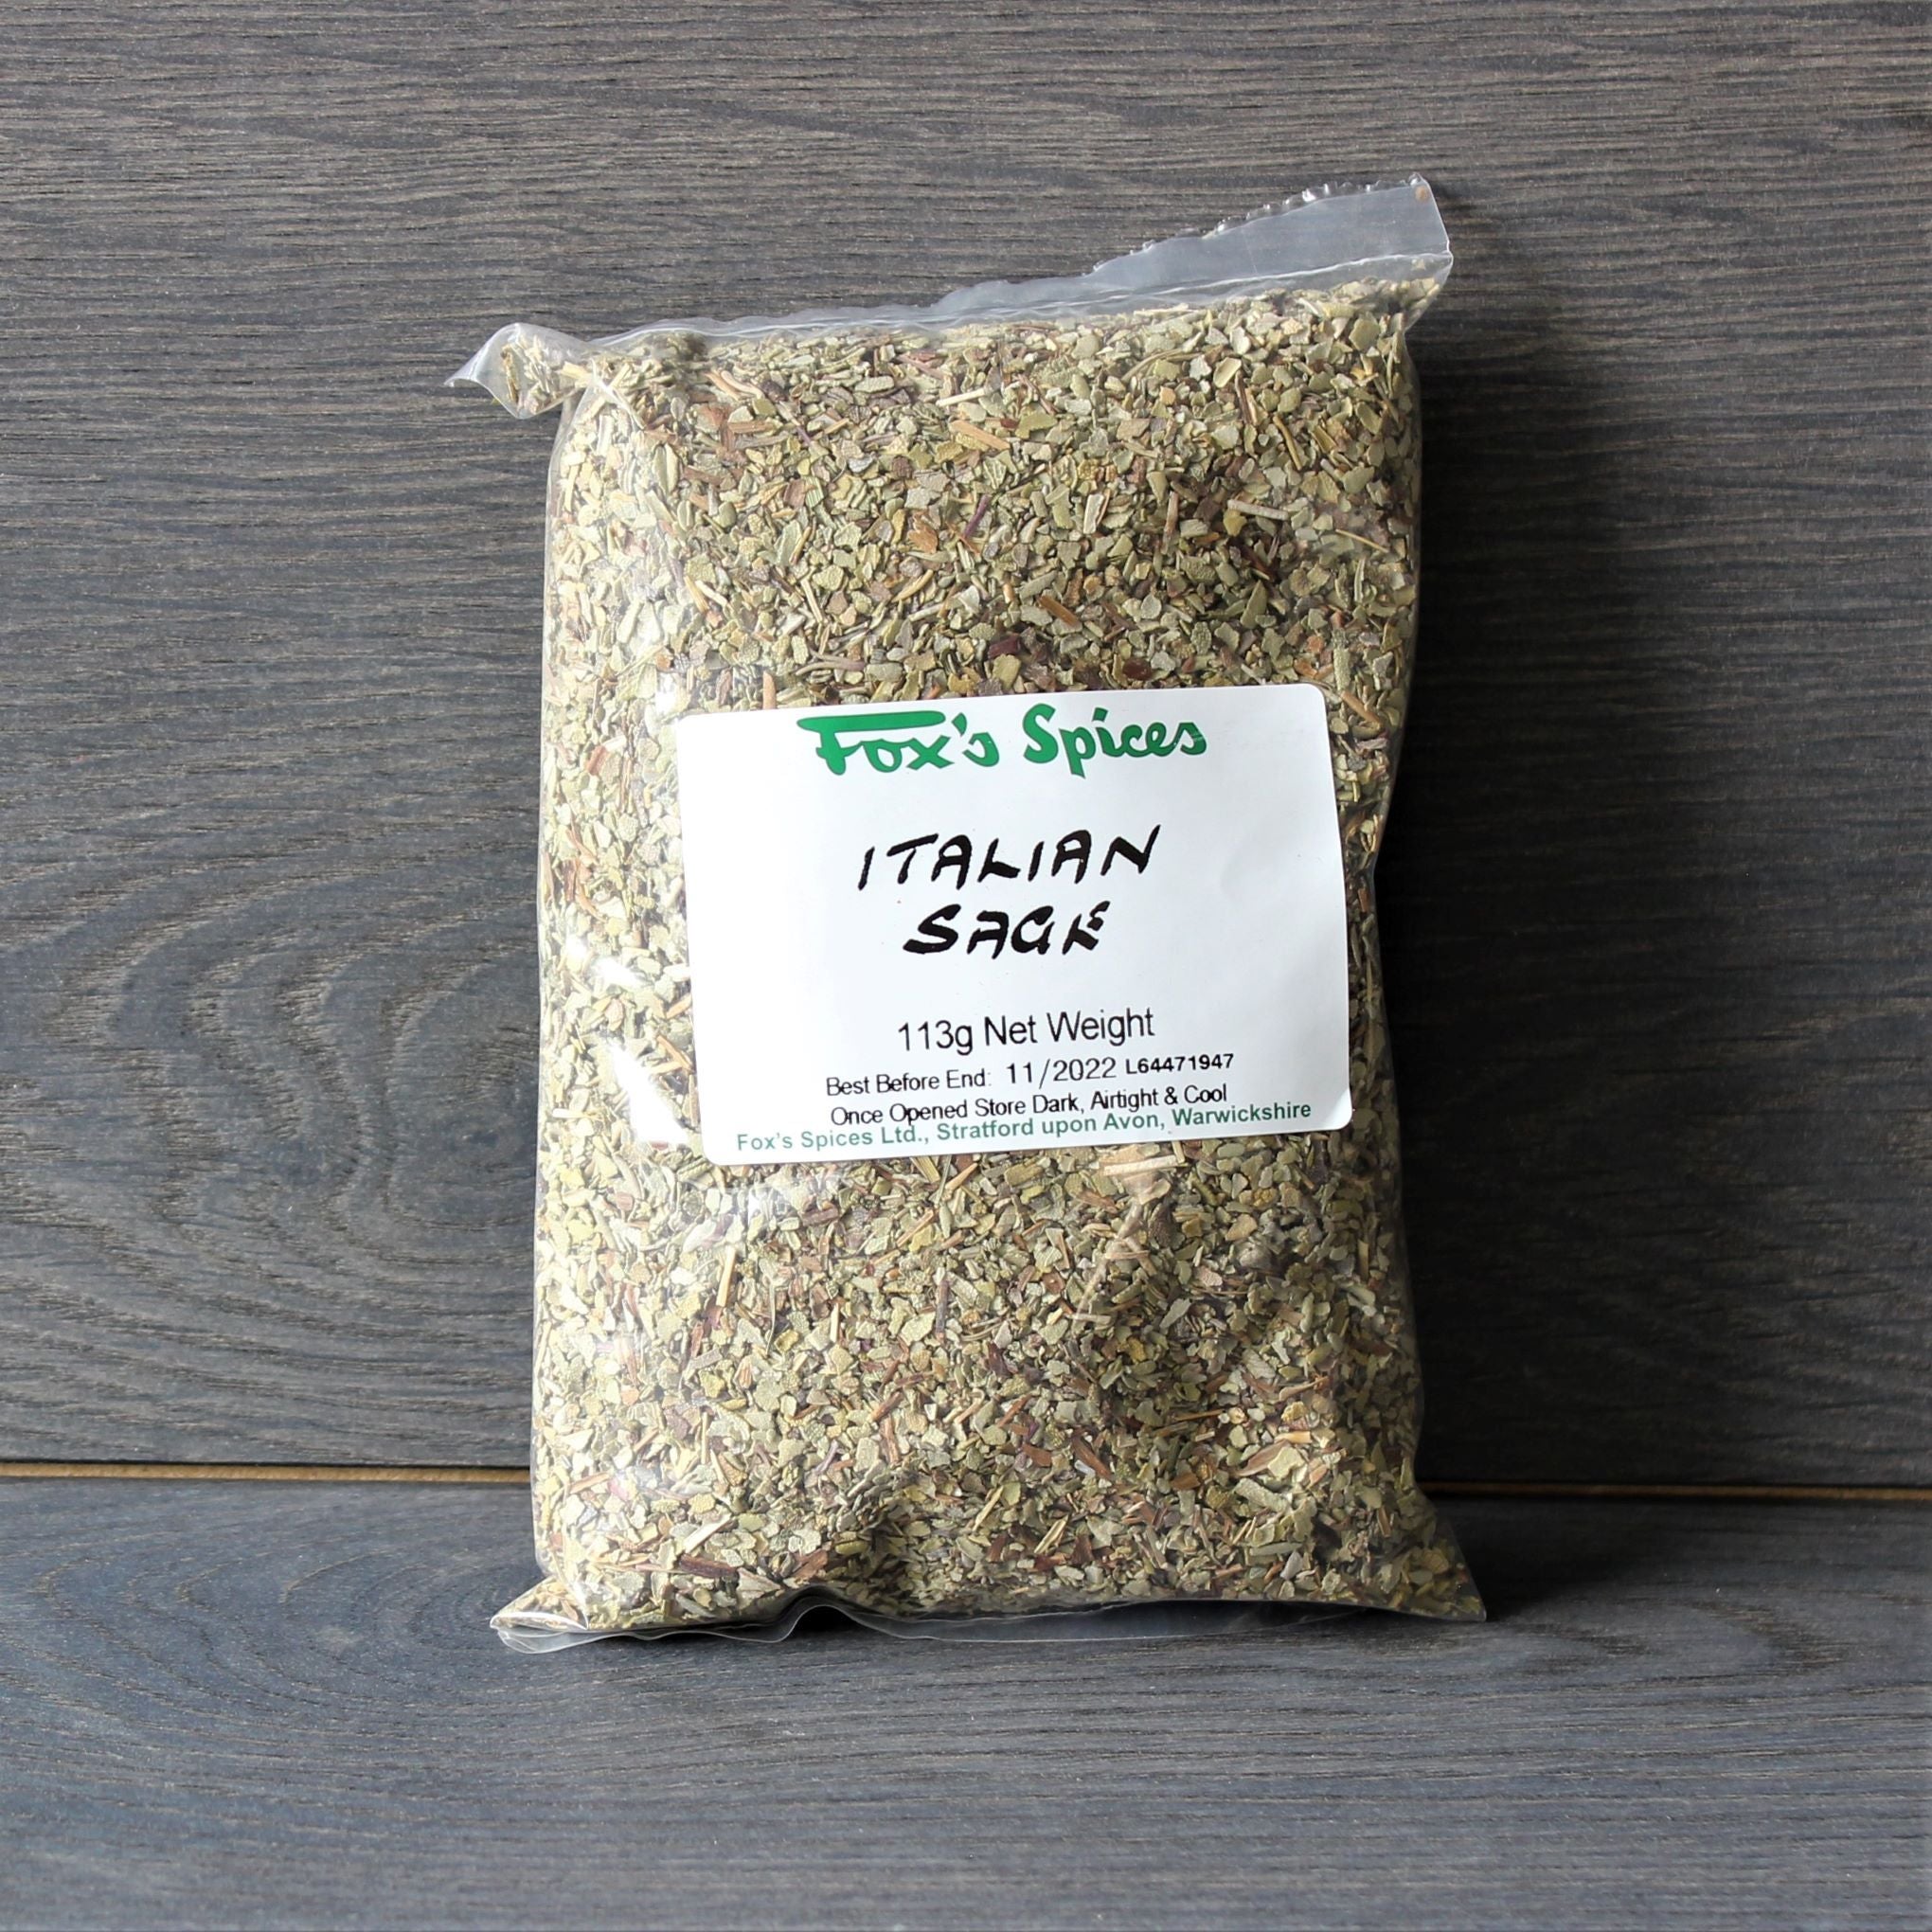 A 113g bag of Italian Sage from Fox's Spices 